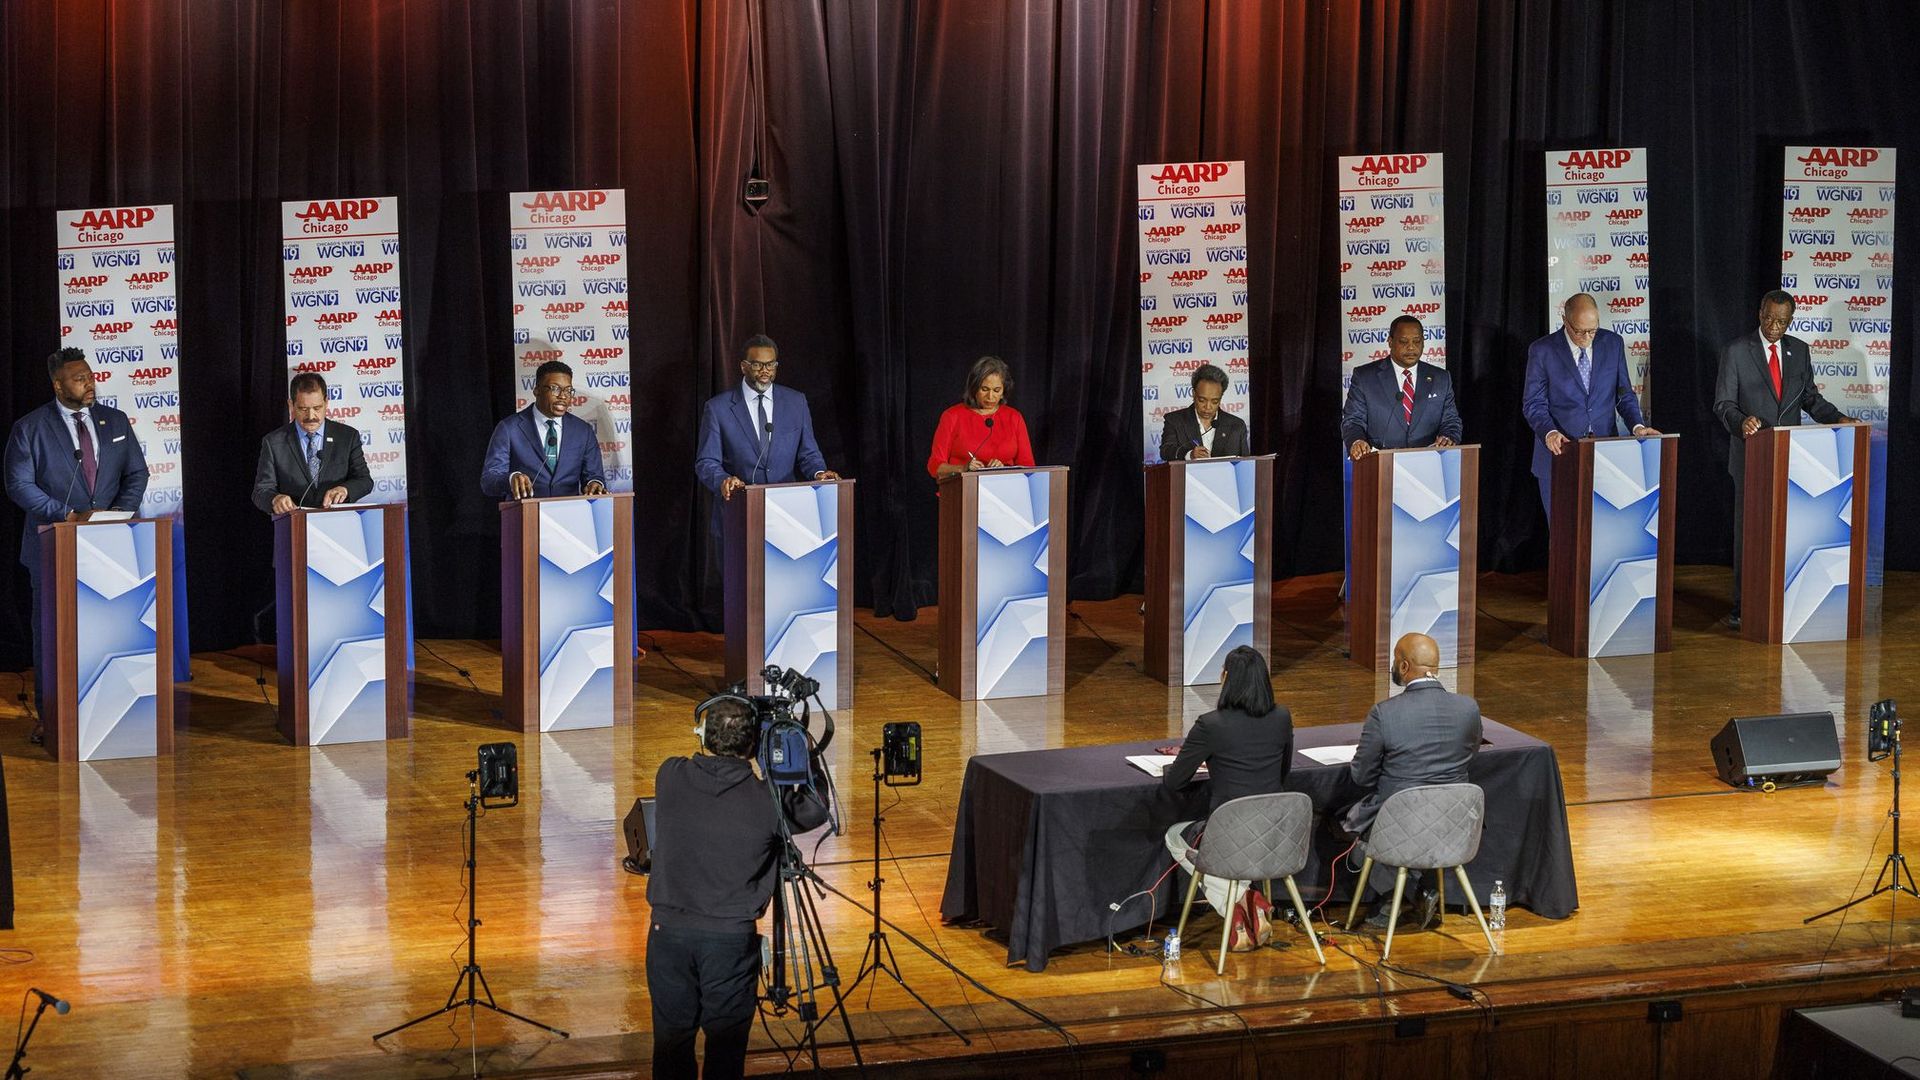 Photo of candidates behind podiums on stage at a debate. 